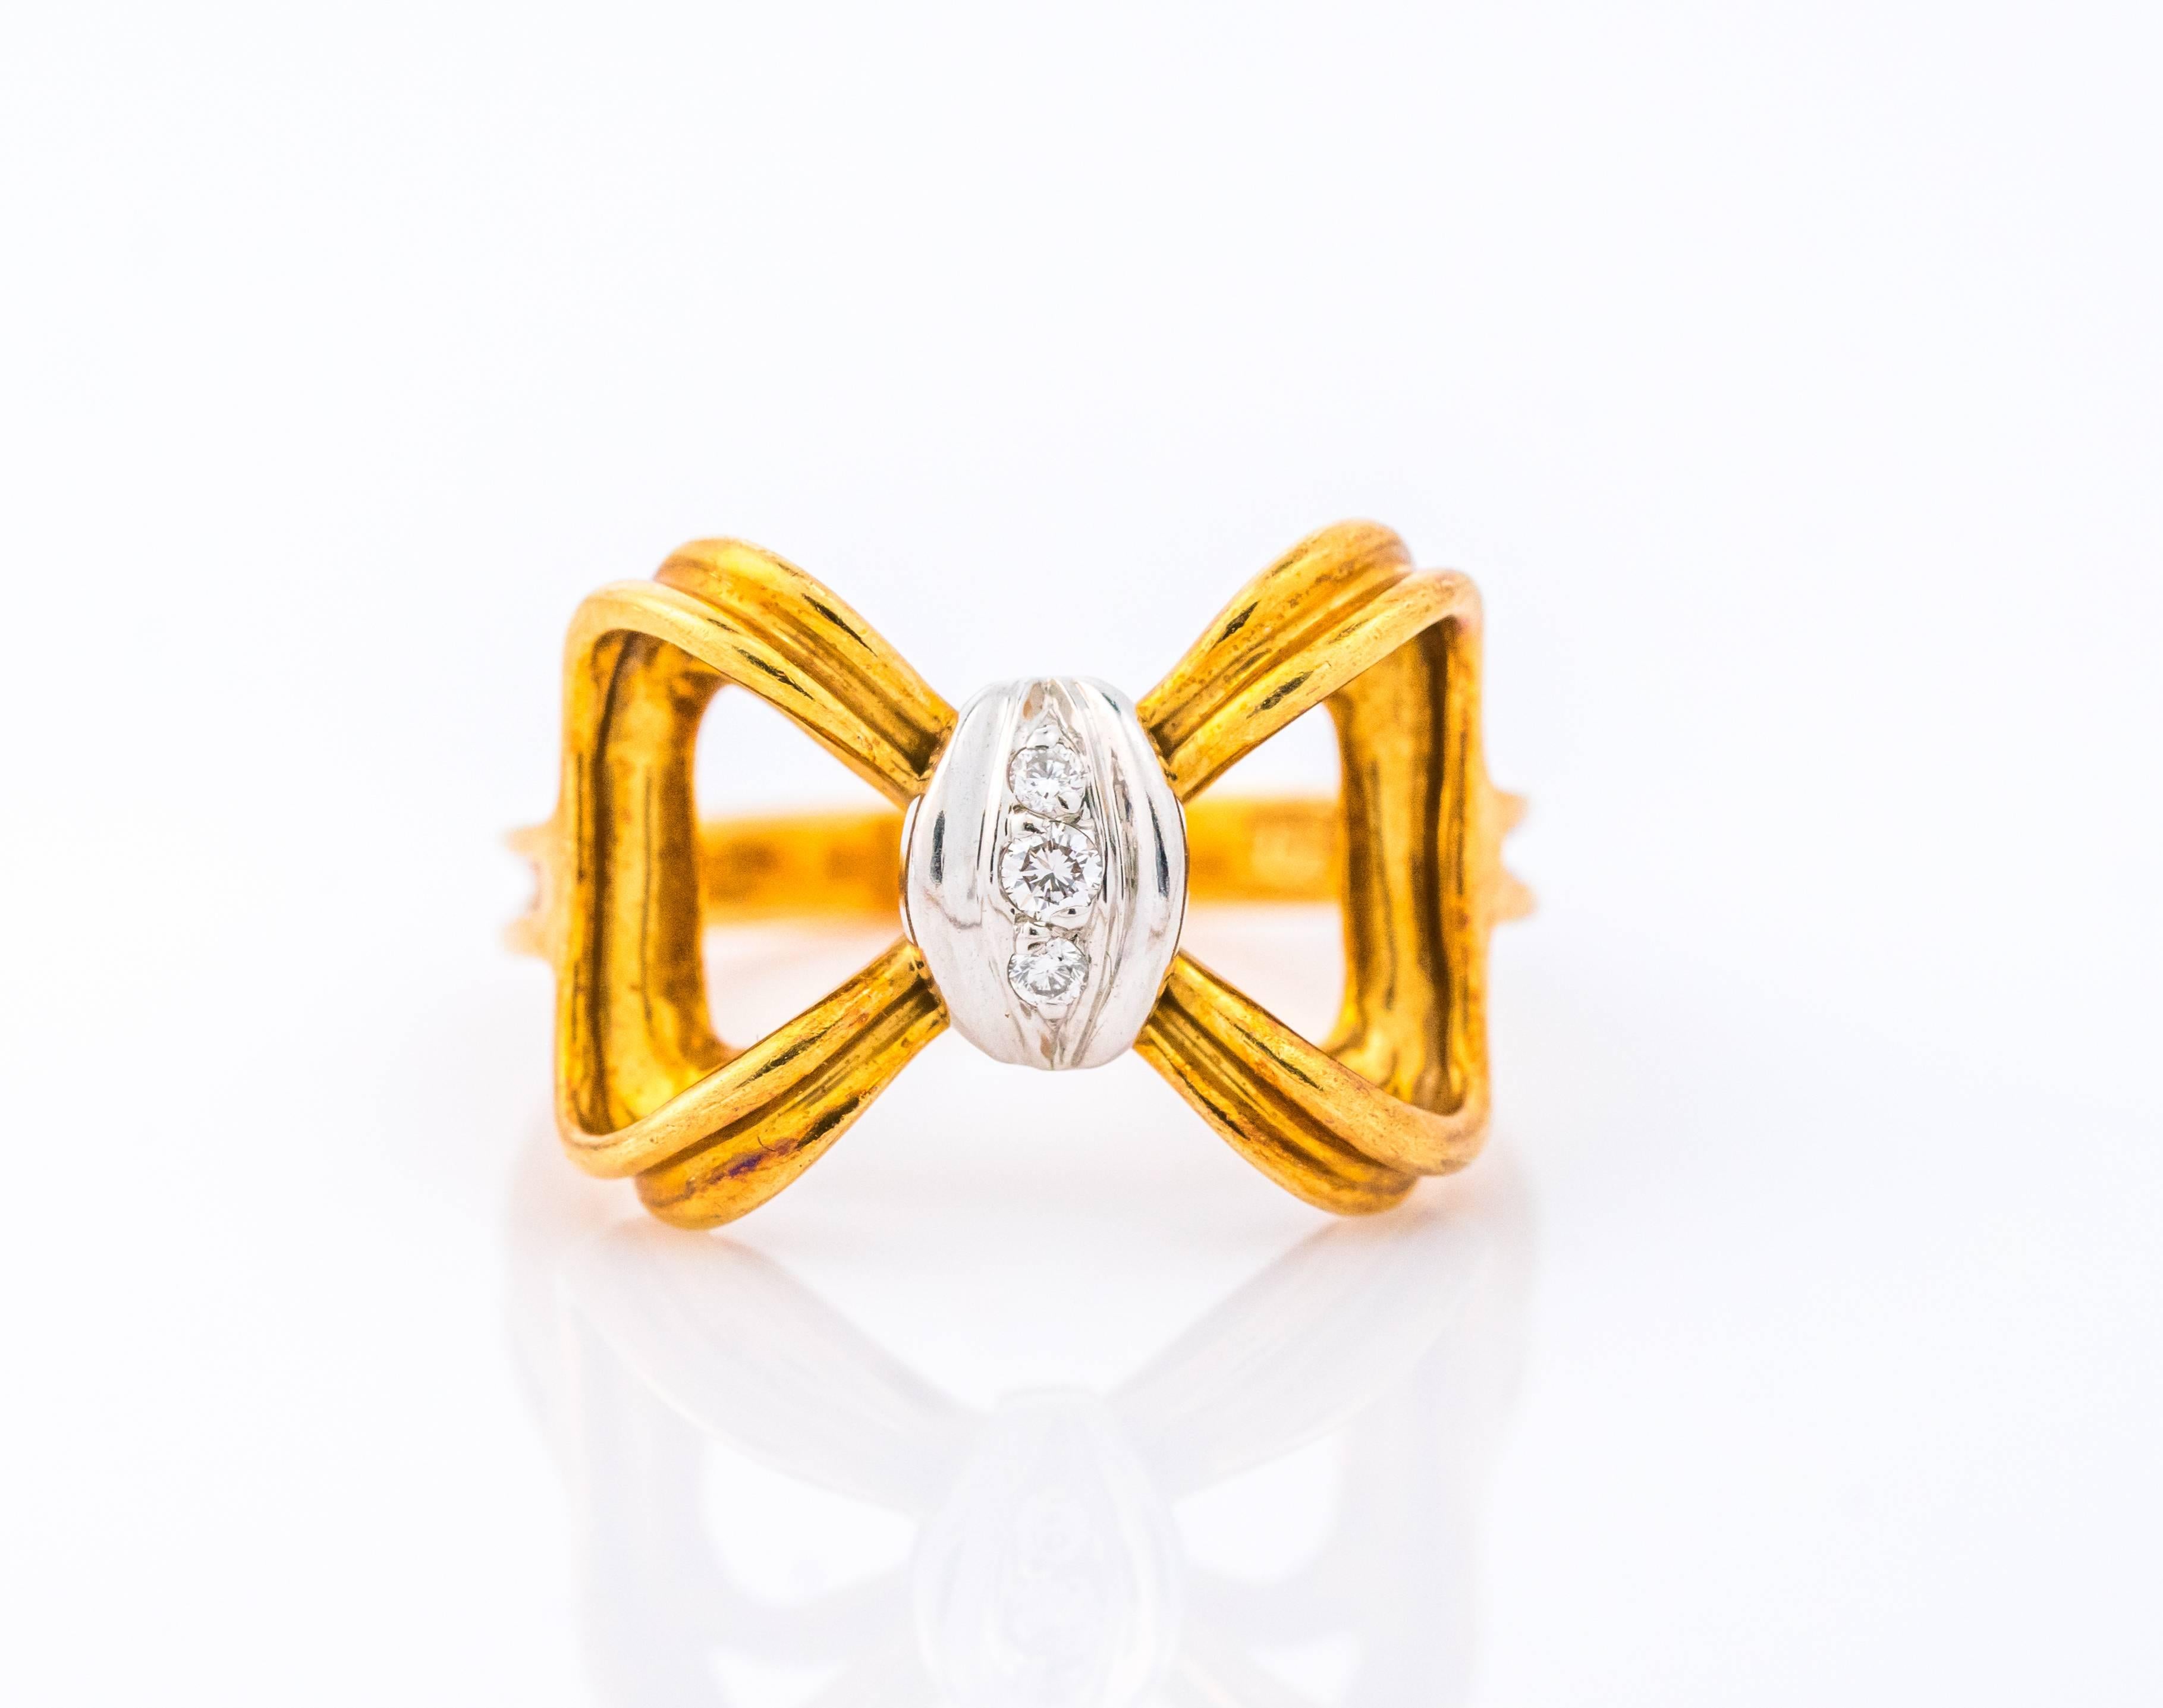 Modern 1980s Tiffany & Co. Diamond, Platinum and 18K Gold Bow Ring